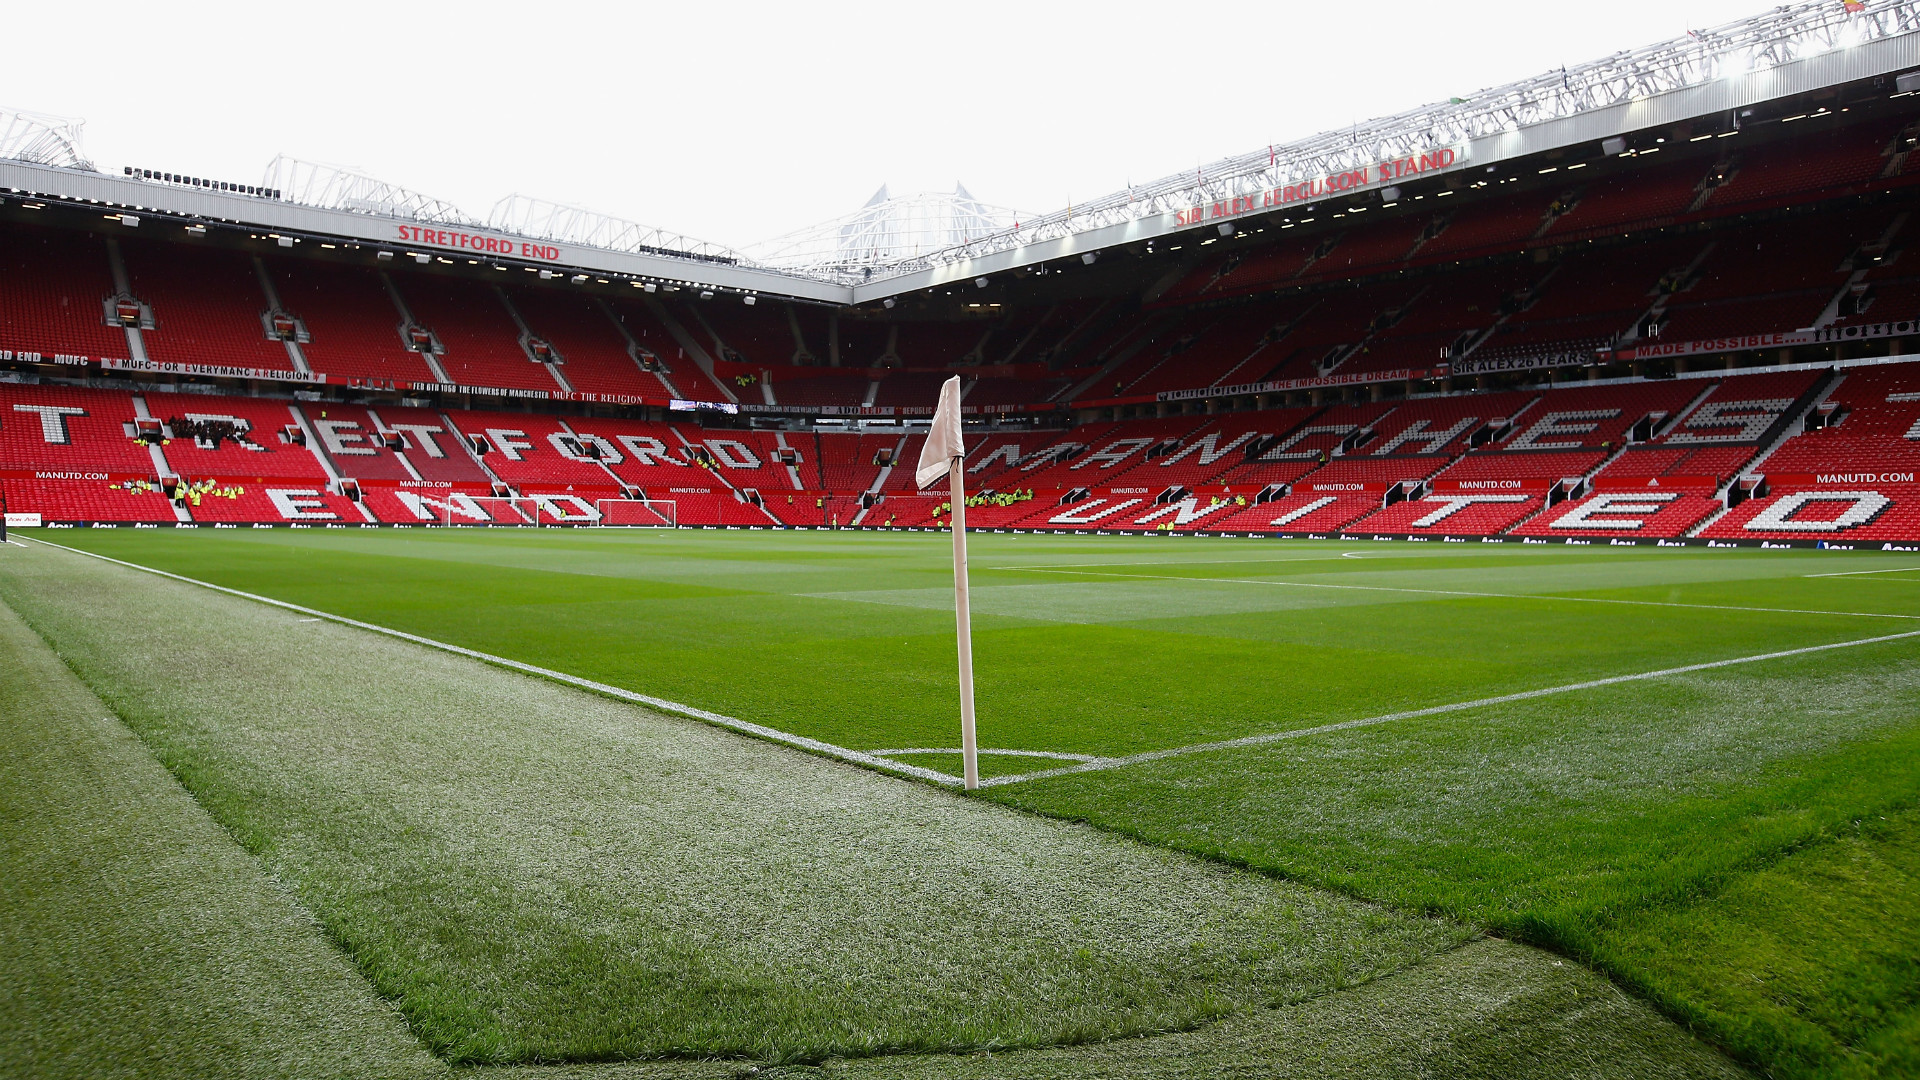 1920x1080 Manchester United's big business rides on record sponsor revenues